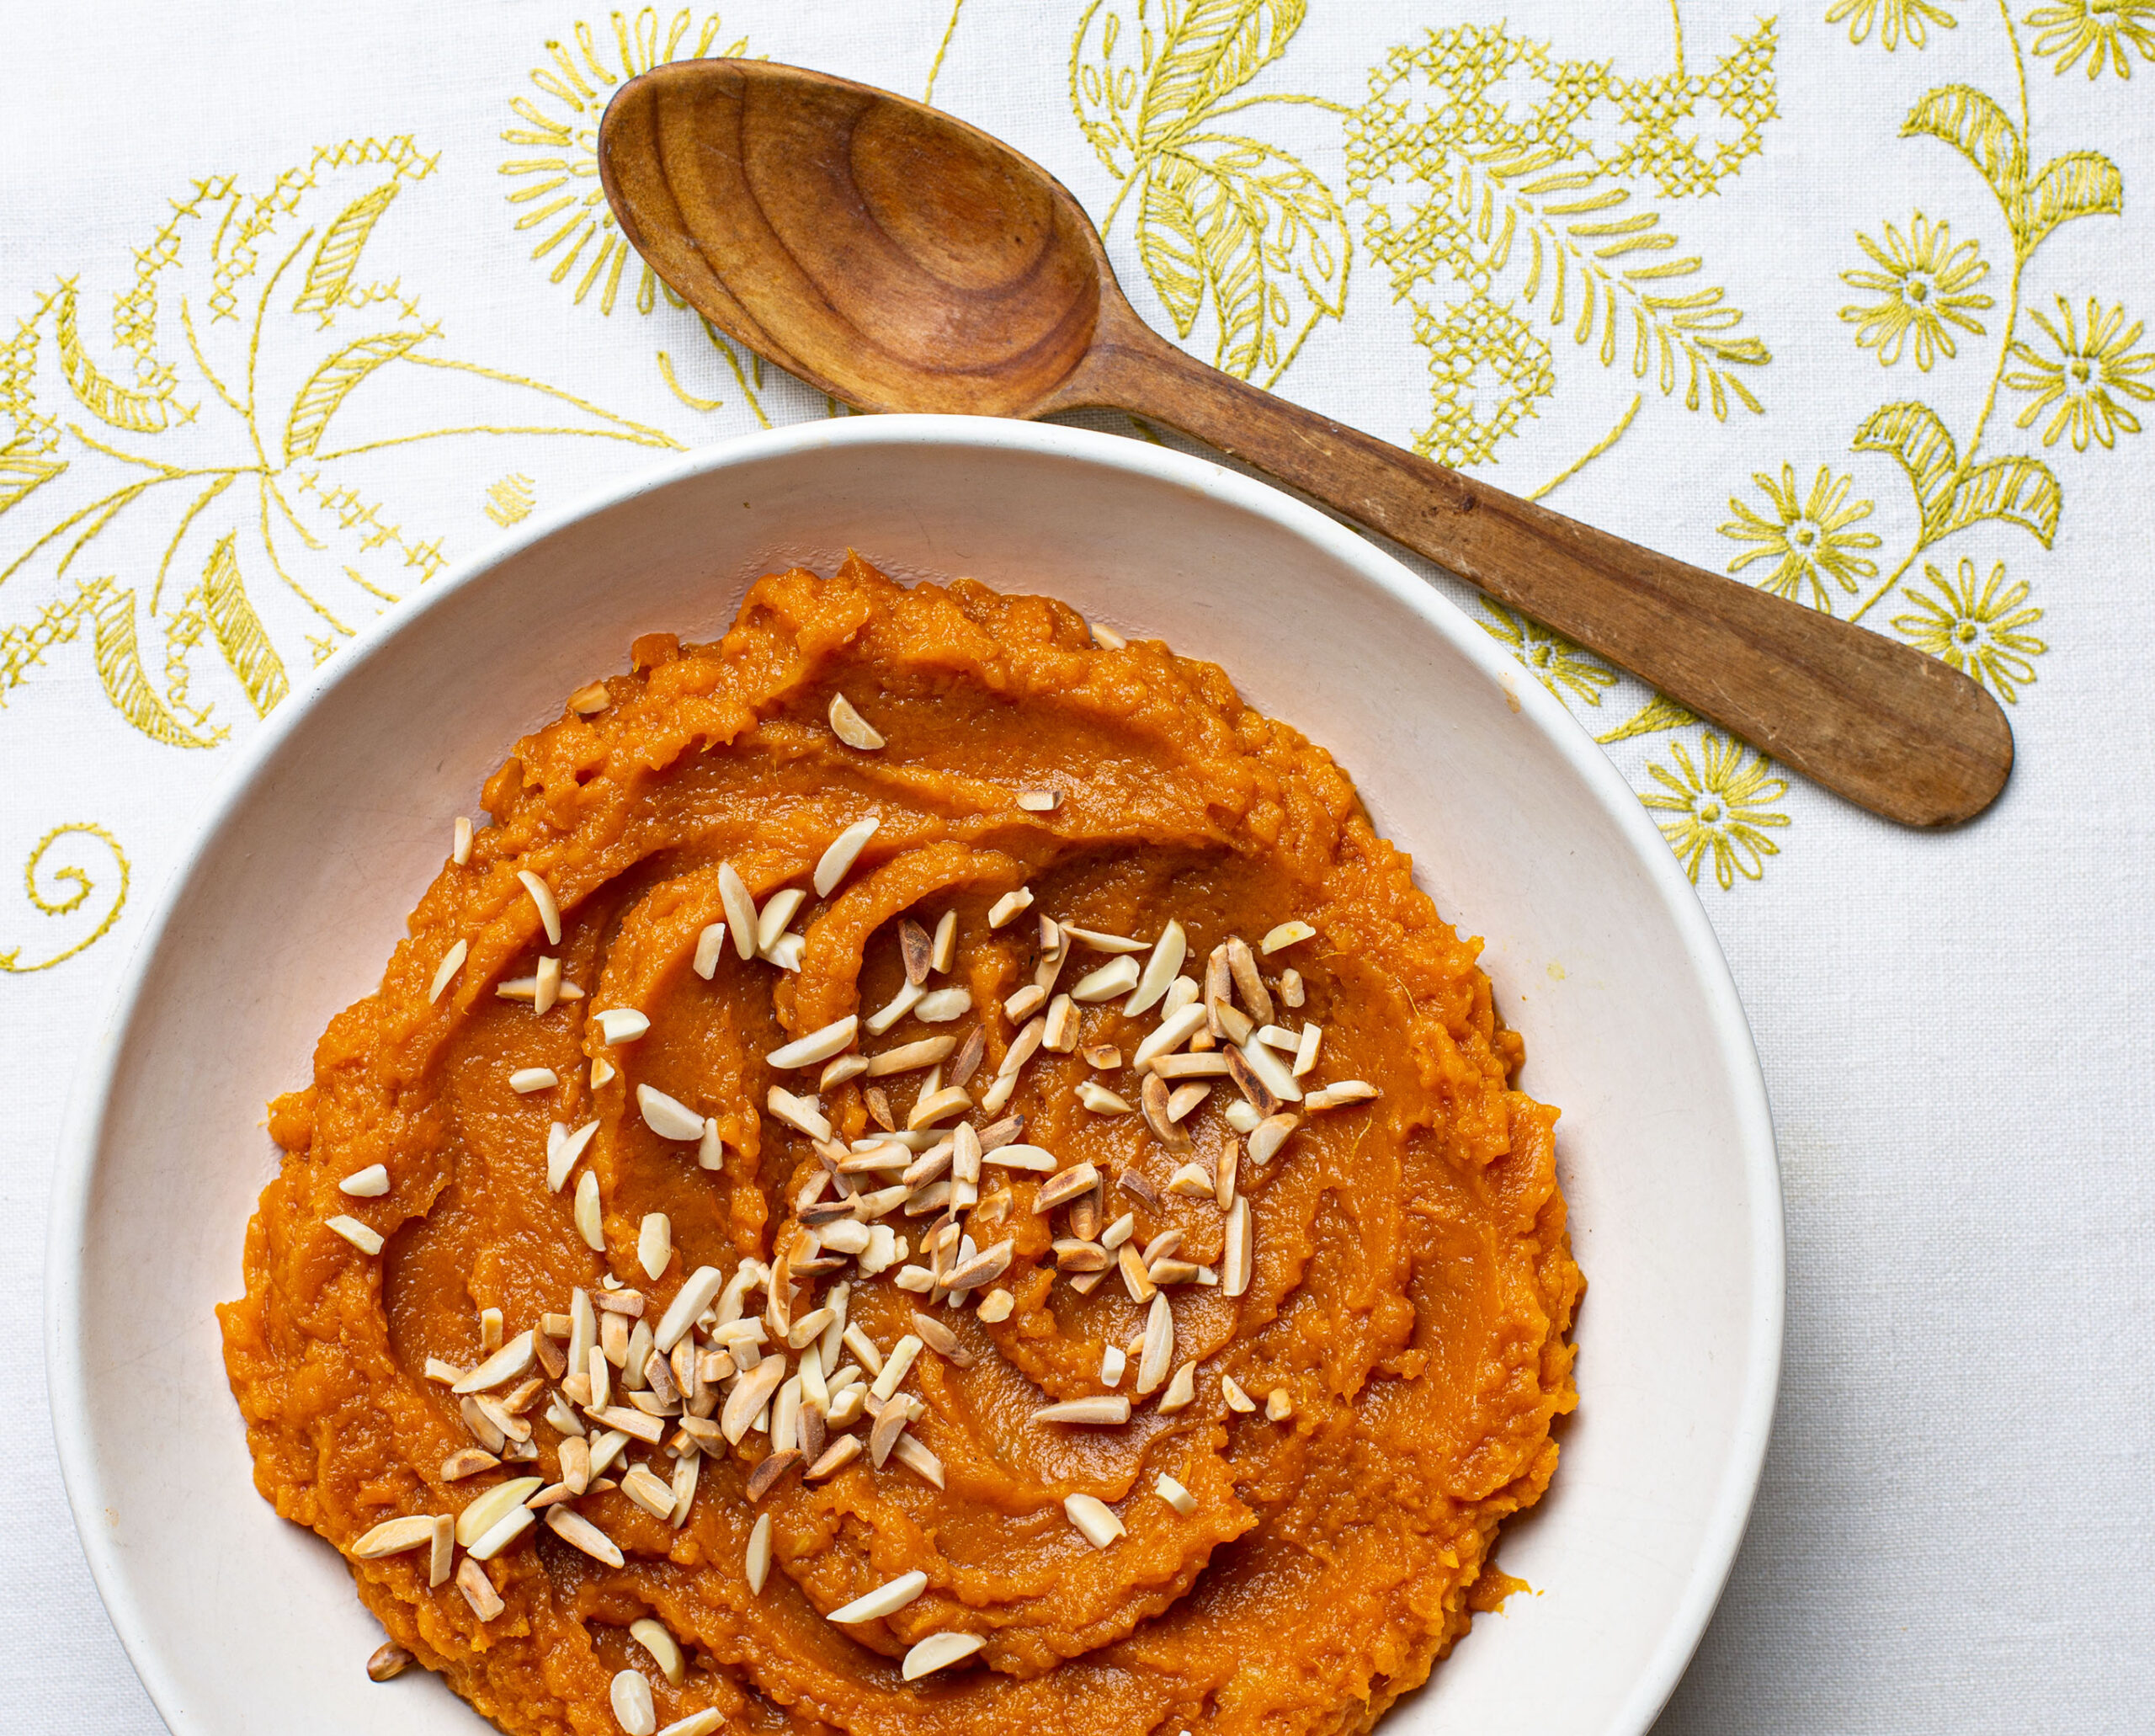 Mashed Sweet Potatoes with Caramelized Pineapple